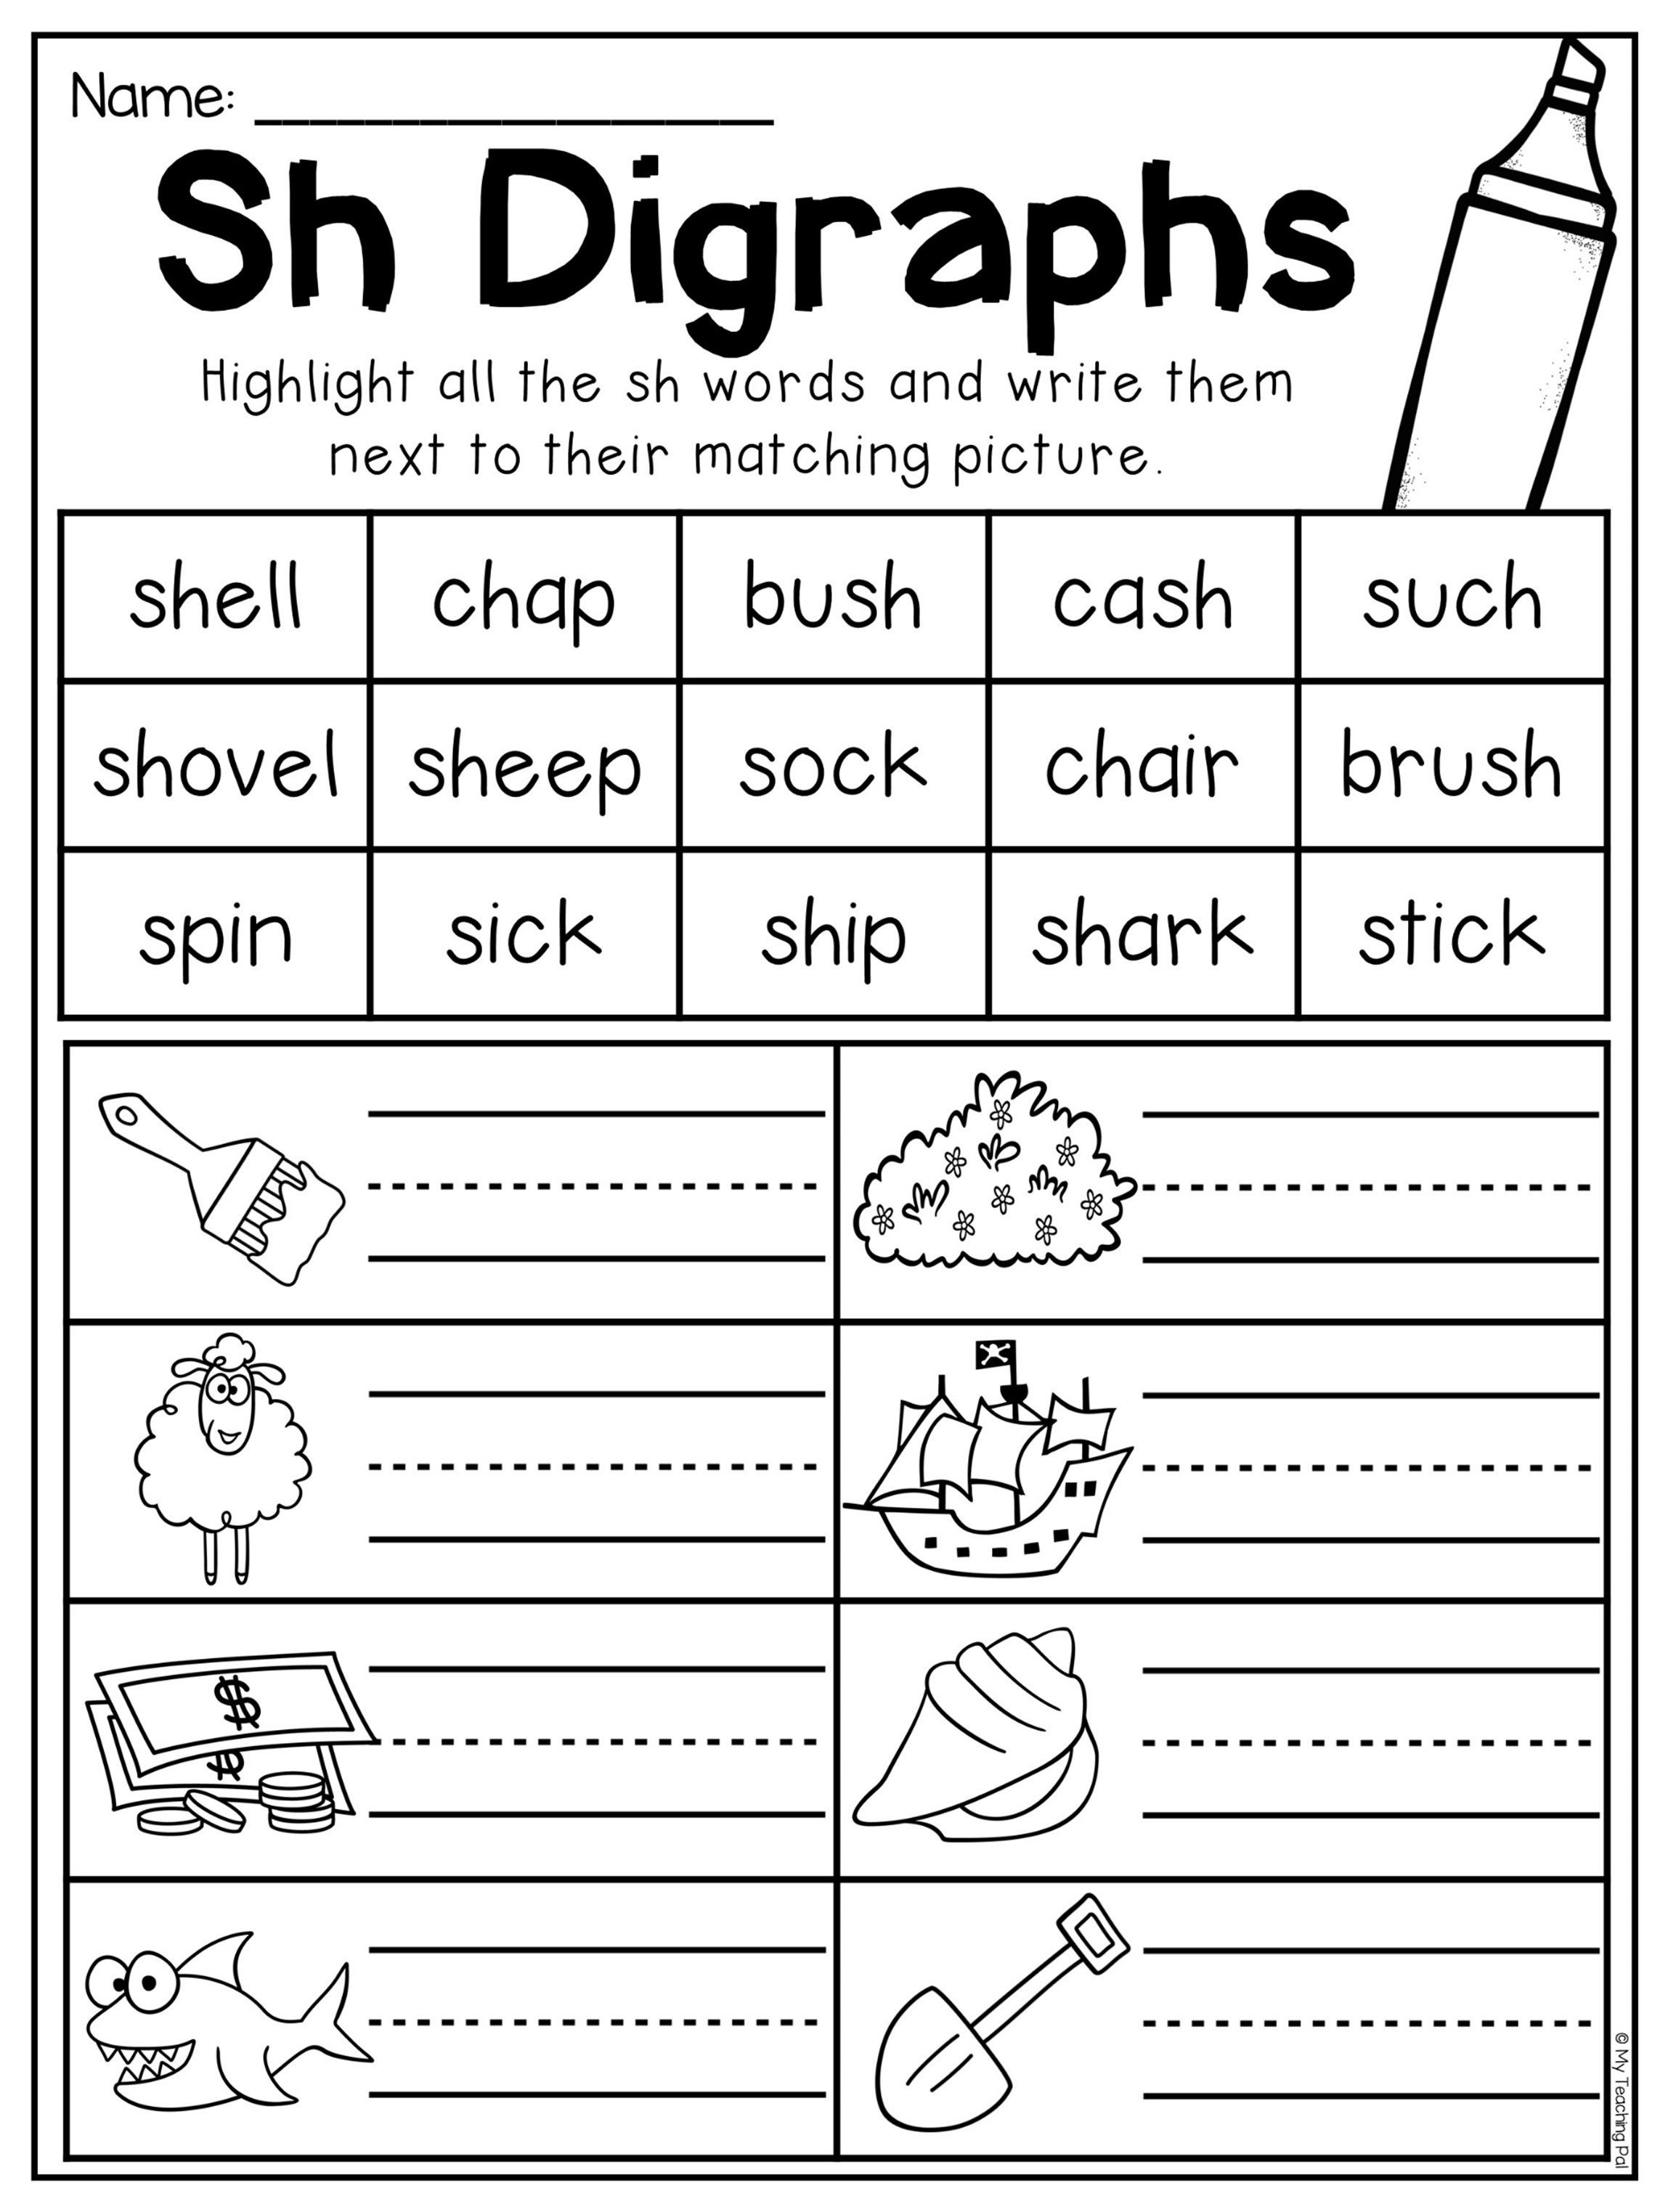 Digraph Flip Books | Digraphs : Ch, Sh, Th, Ph, Wh, And Vowel Team - Free Printable Ch Digraph Worksheets